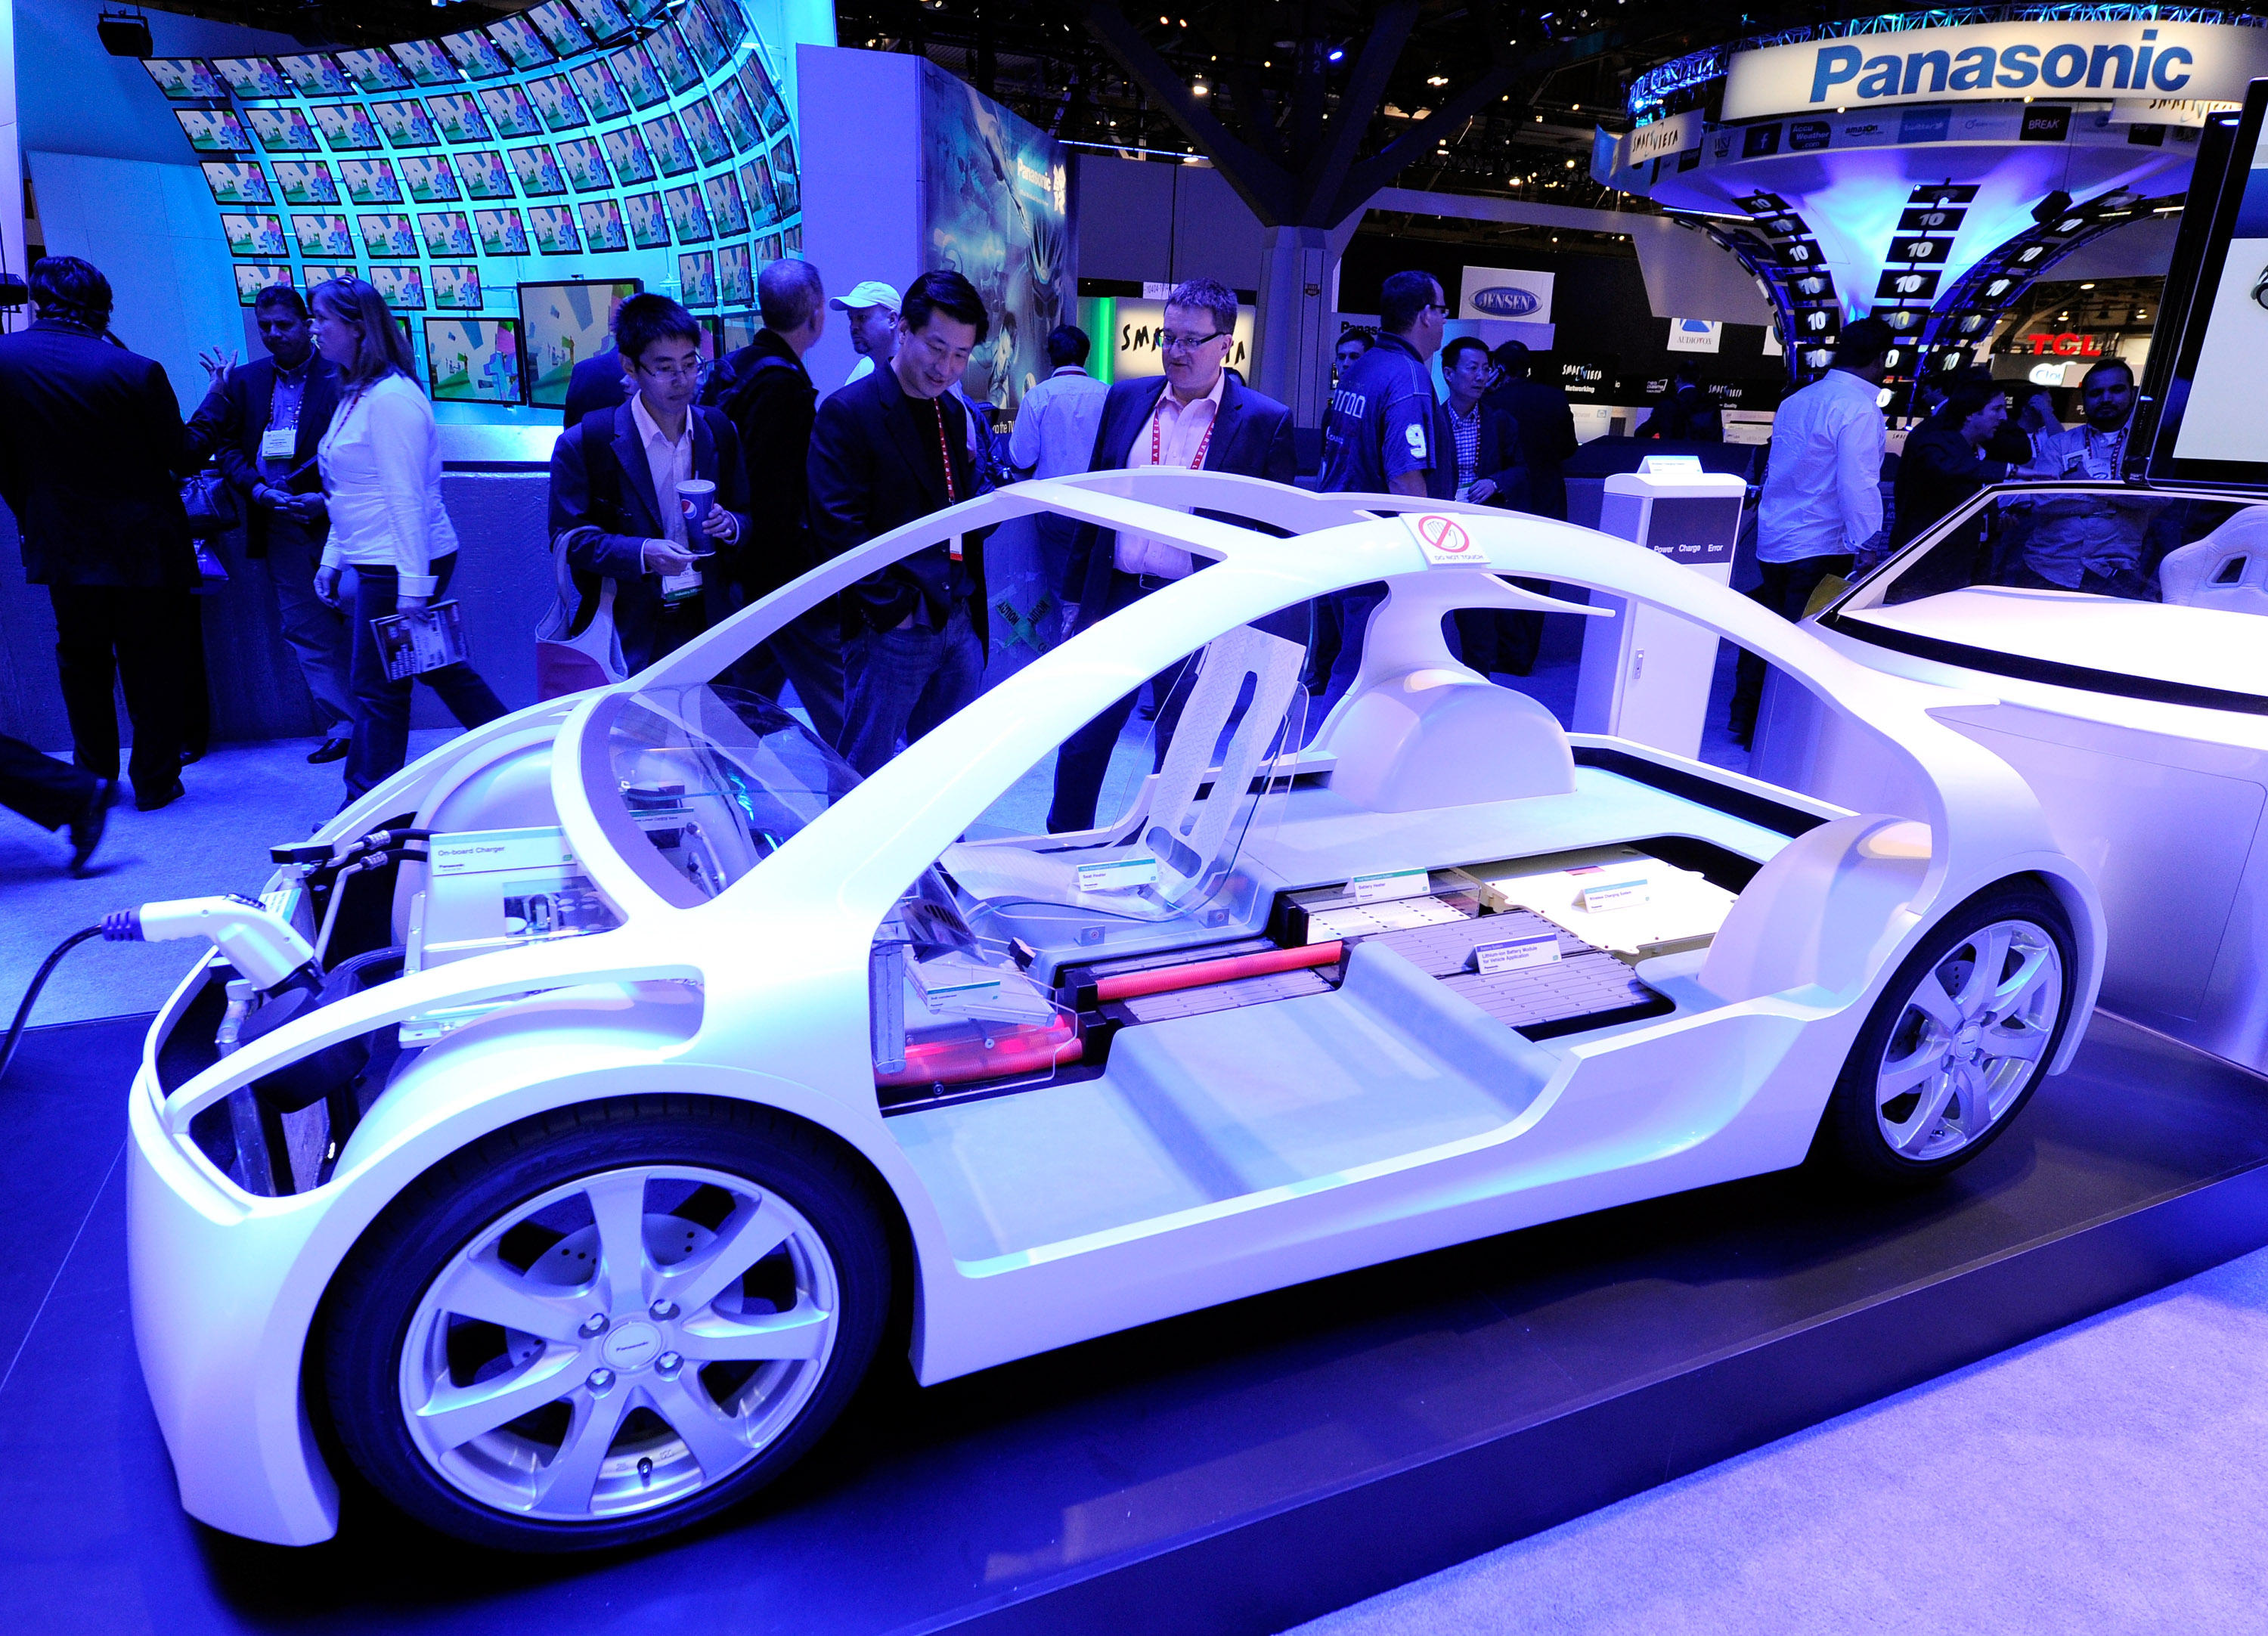 LAS VEGAS, NV - JANUARY 12: Attendees look at components for an electric vehicle at the Panasonic booth at the 2012 International Consumer Electronics Show at the Las Vegas Convention Center January 12, 2012 in Las Vegas, Nevada. CES, the world's largest annual consumer technology trade show, runs through January 13 and features more than 3,100 exhibitors showing off their latest products and services to about 140,000 attendees. Photo via AP.